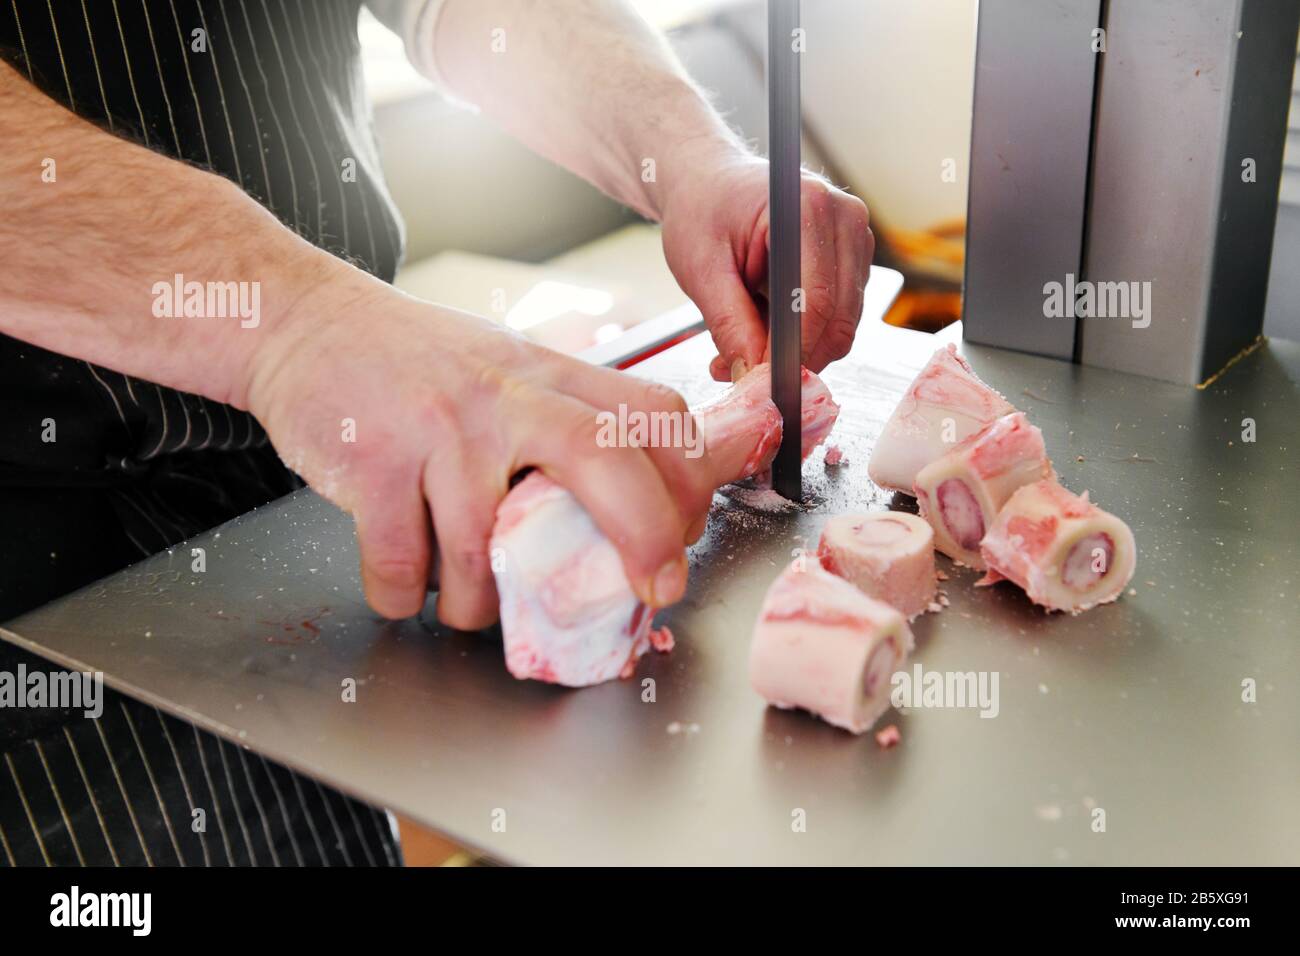 Butcher sawing marrow bones from a calf femur using a band saw in the butchery in a close up on his hands Stock Photo